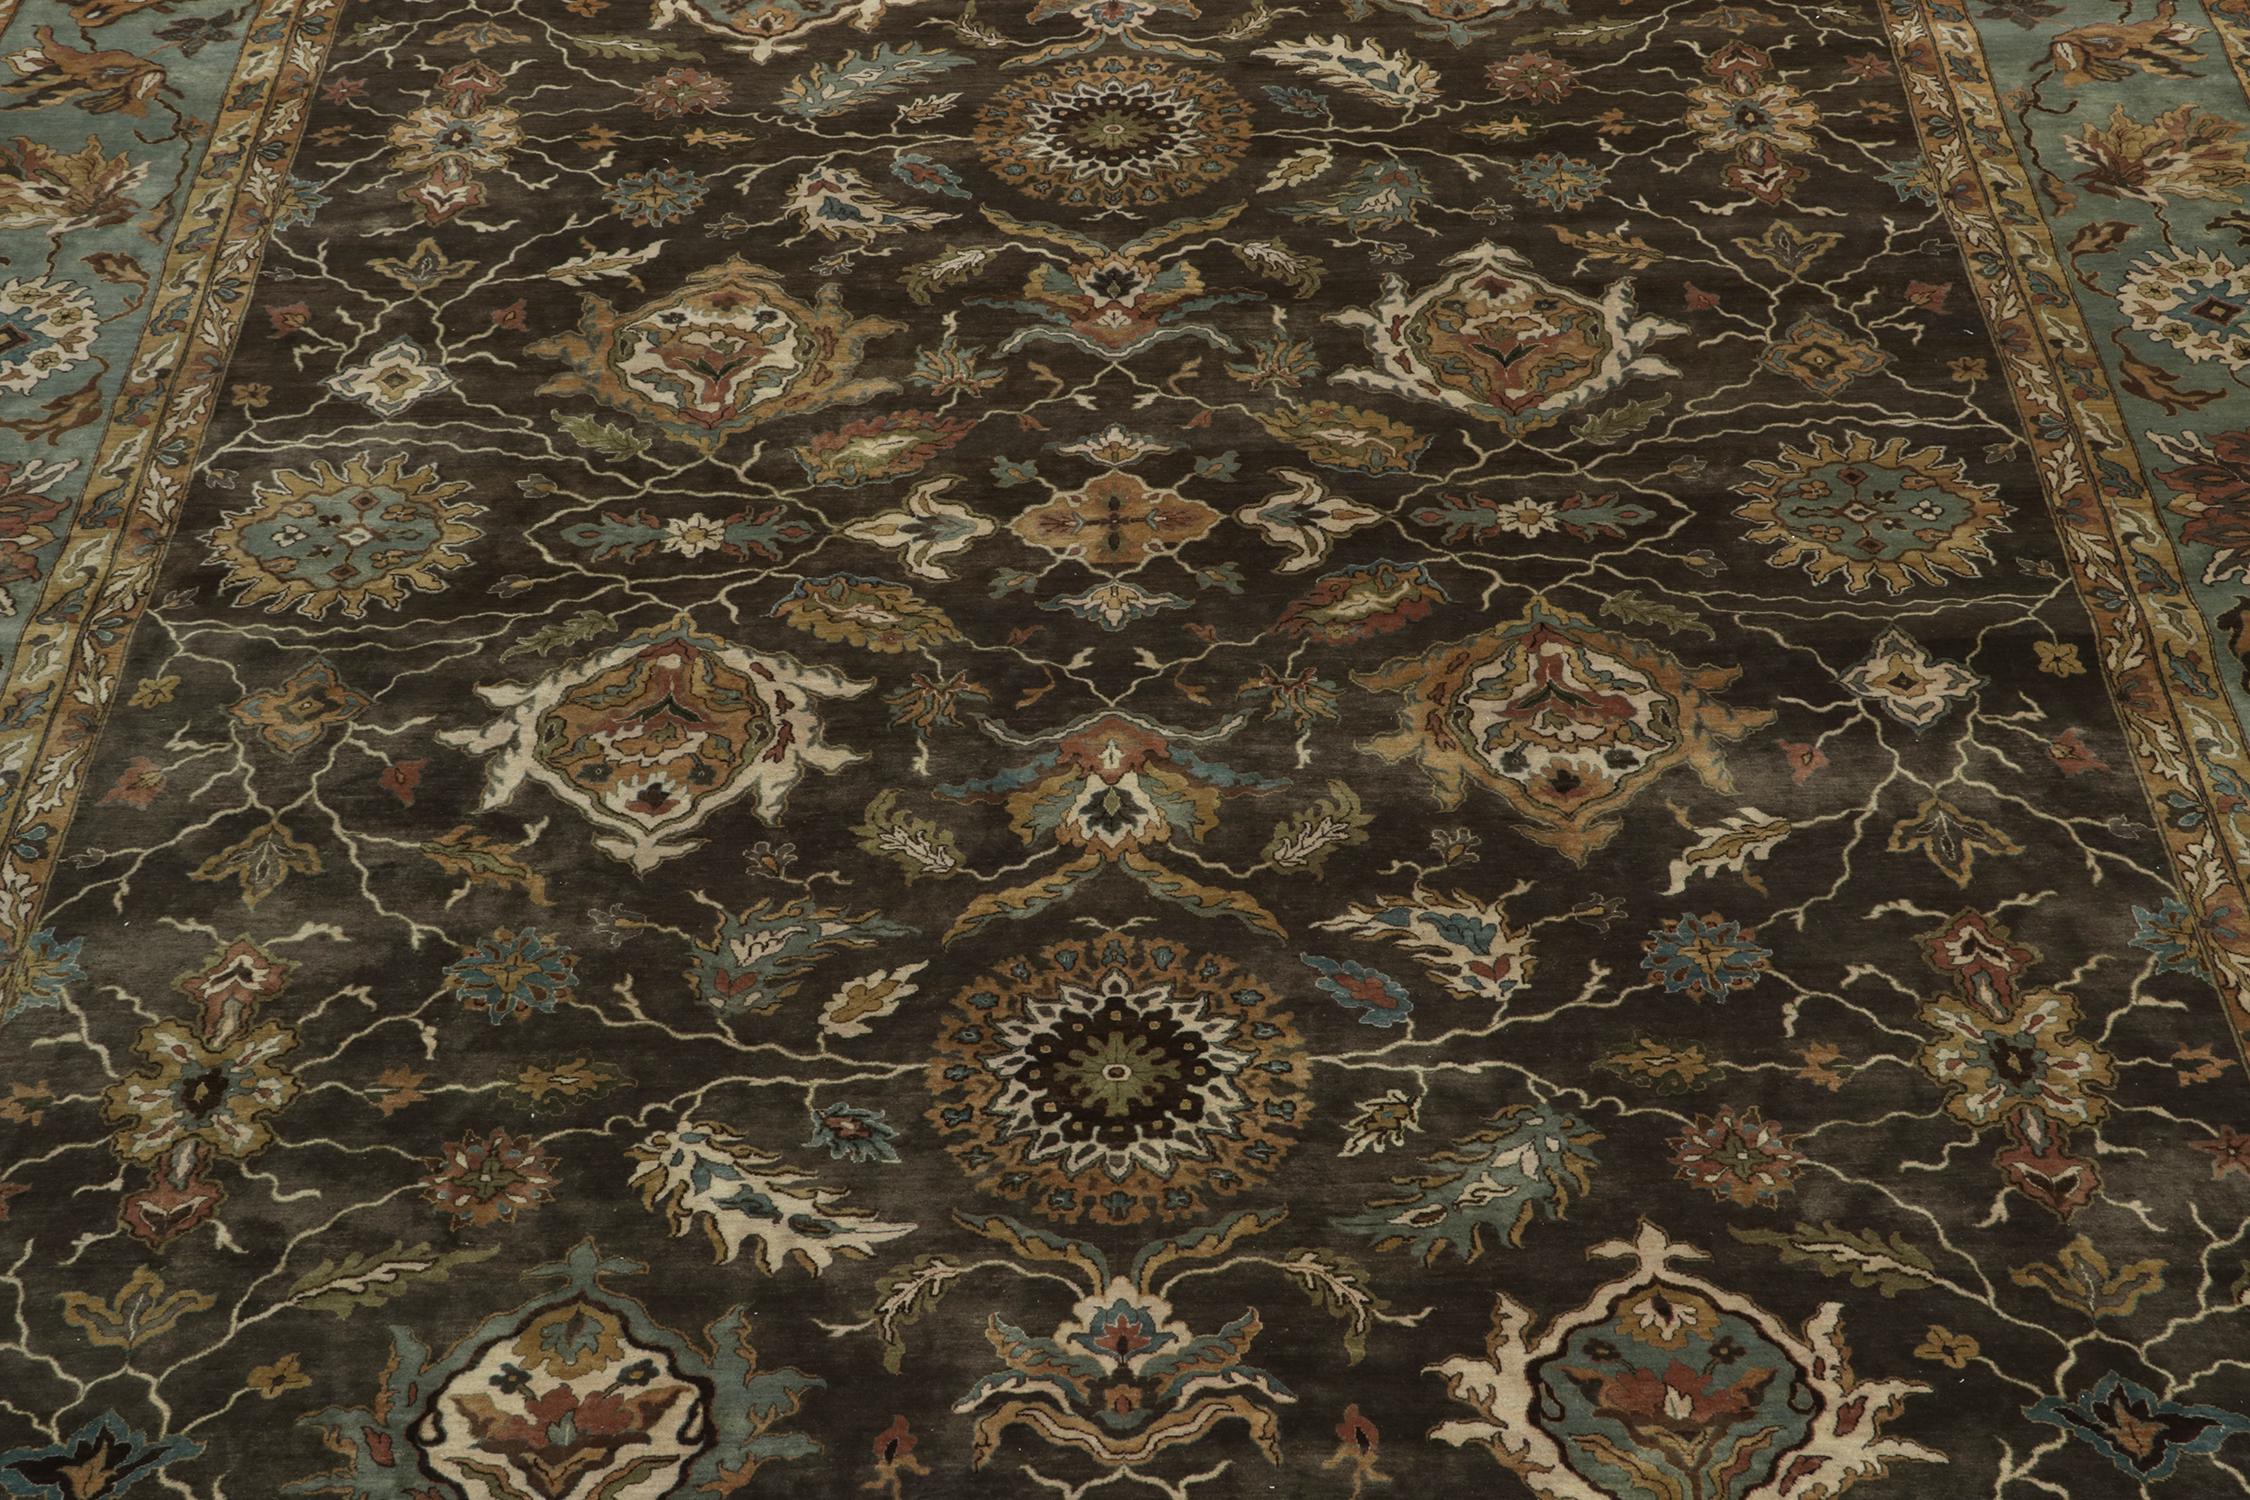 Contemporary Rug & Kilim’s Classic Tabriz style rug in Brown, Blue and Gold Floral Patterns For Sale